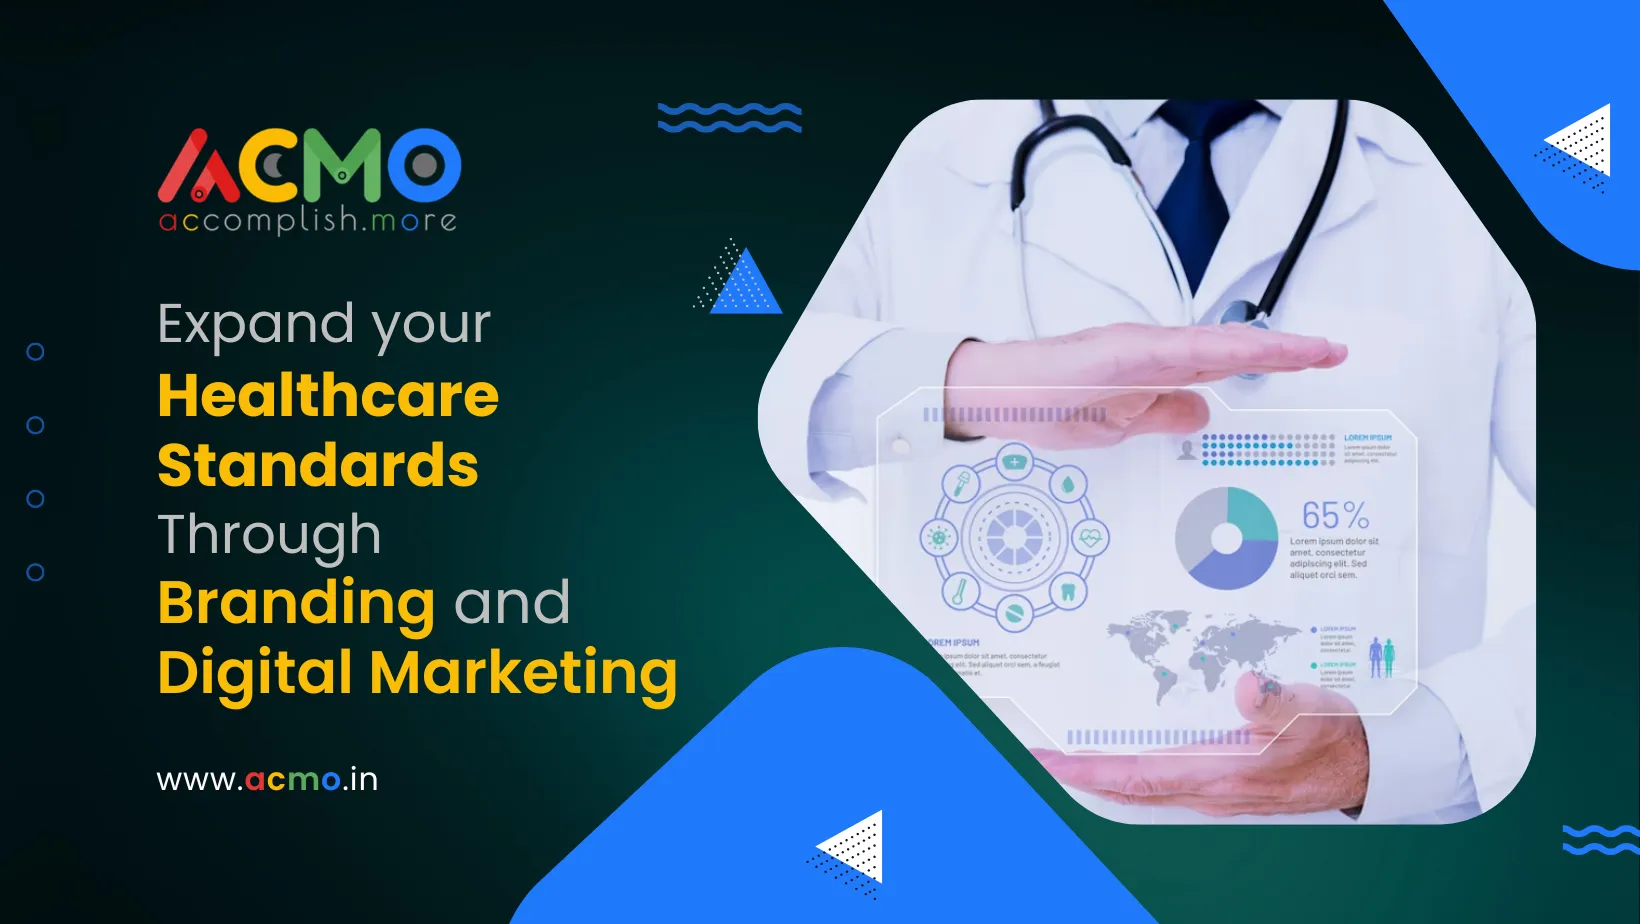 Expand your Healthcare Standards through Branding and Digital Marketing